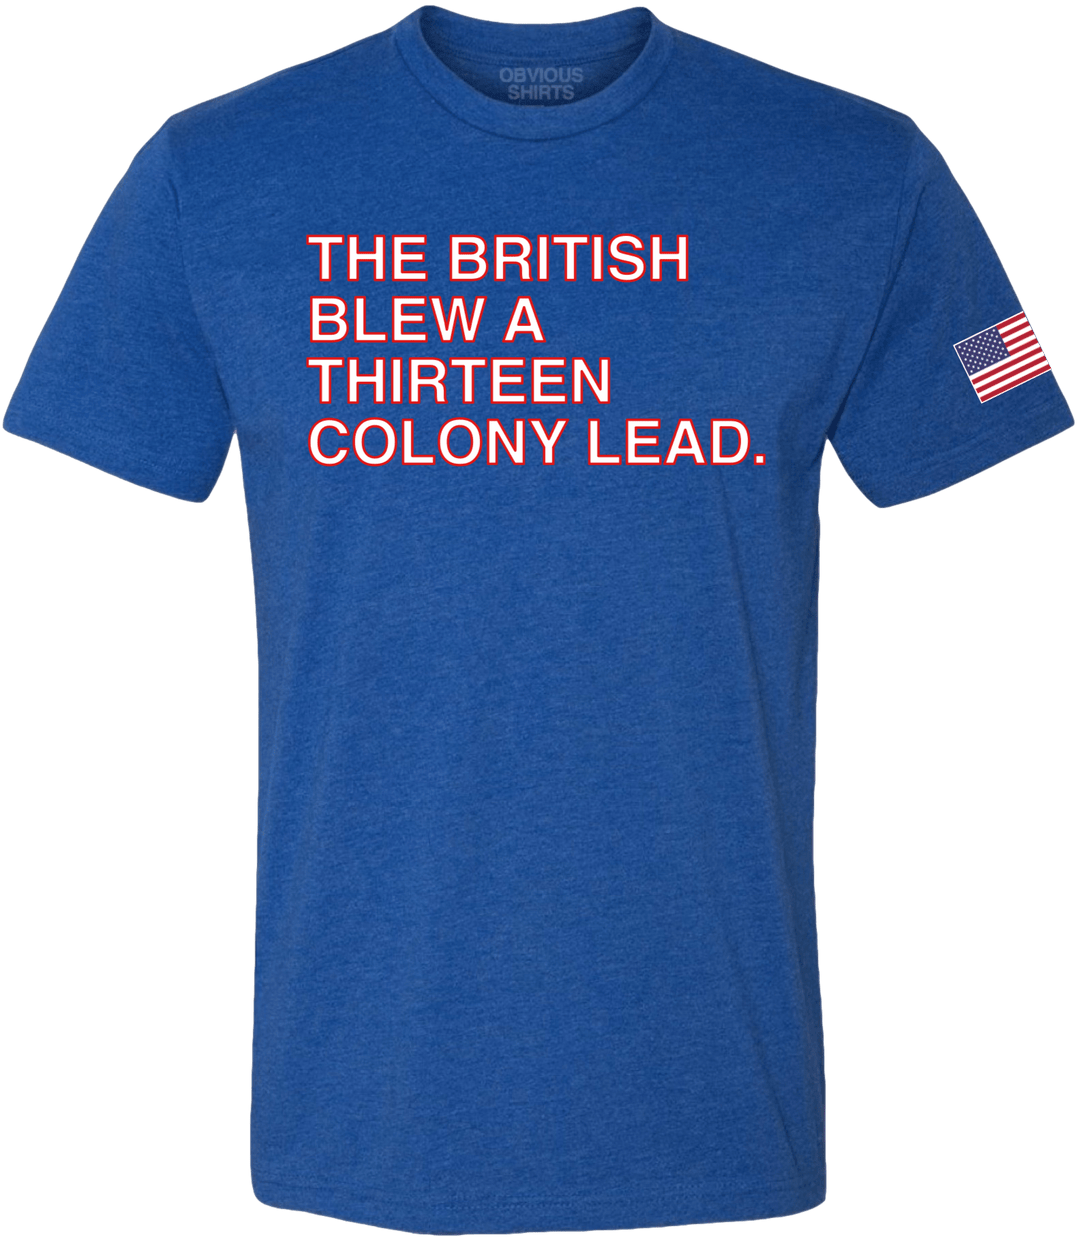 THE BRITISH BLEW A THIRTEEN COLONY LEAD. - OBVIOUS SHIRTS